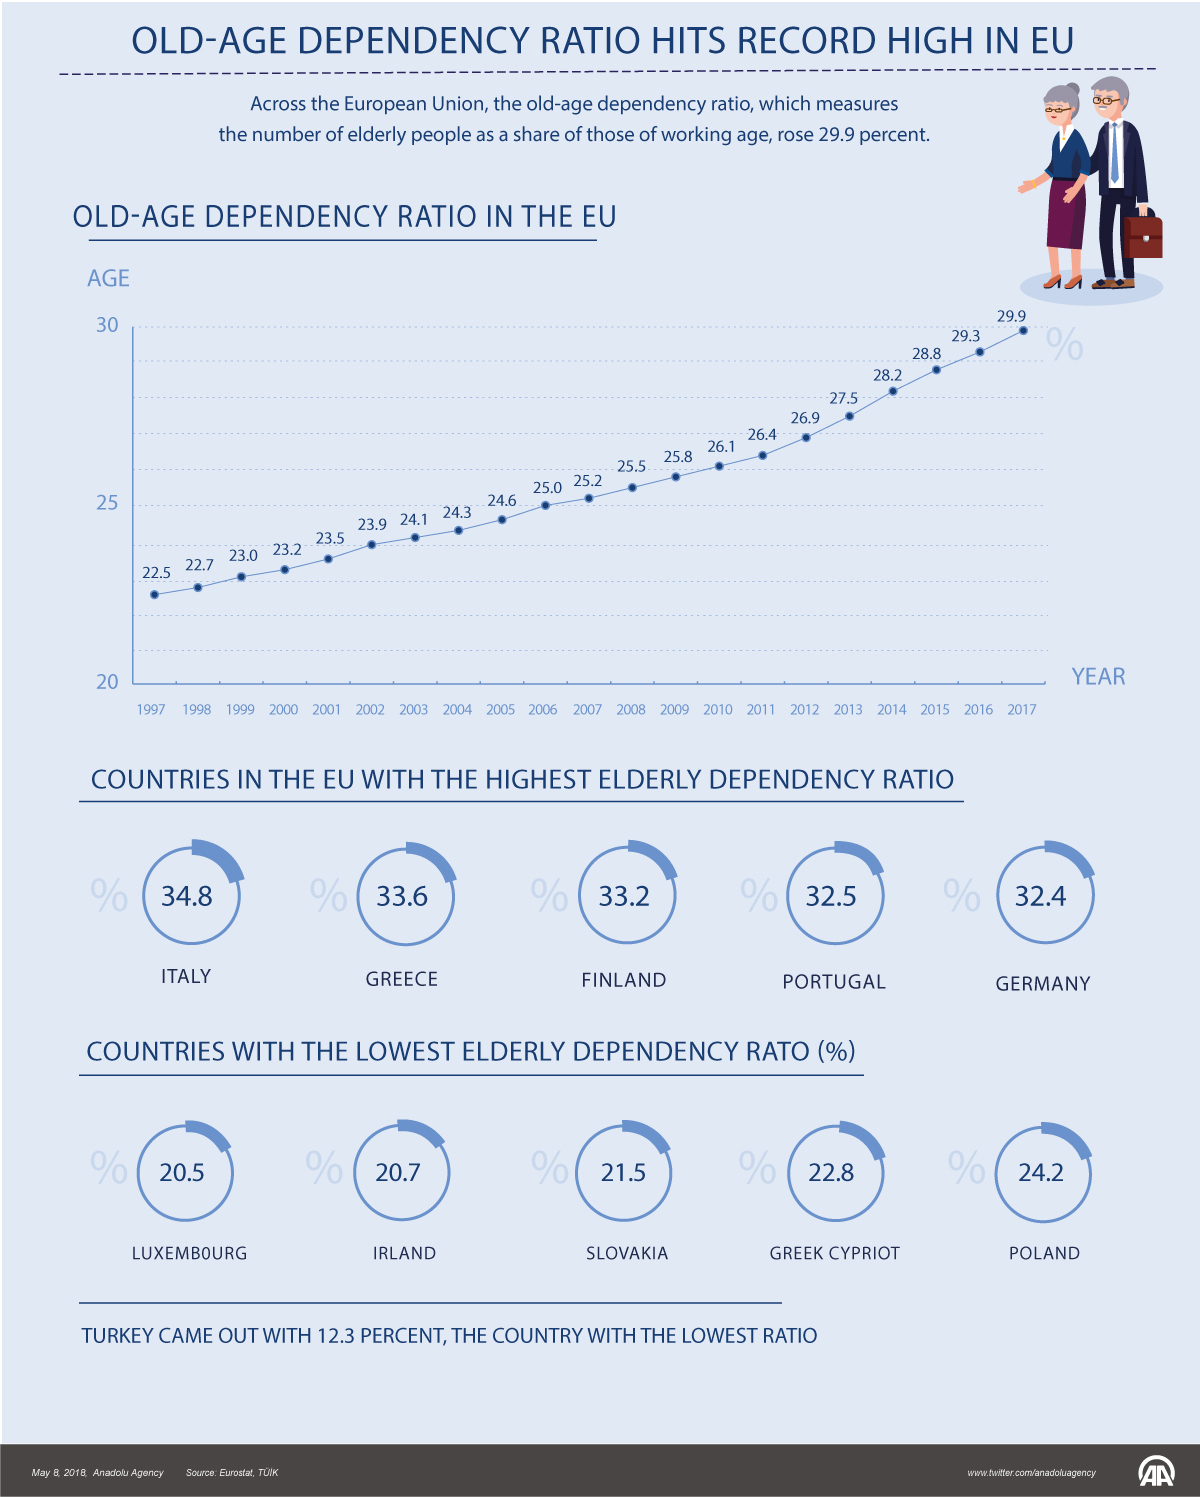 Old-age dependency ratio hits record high in EU